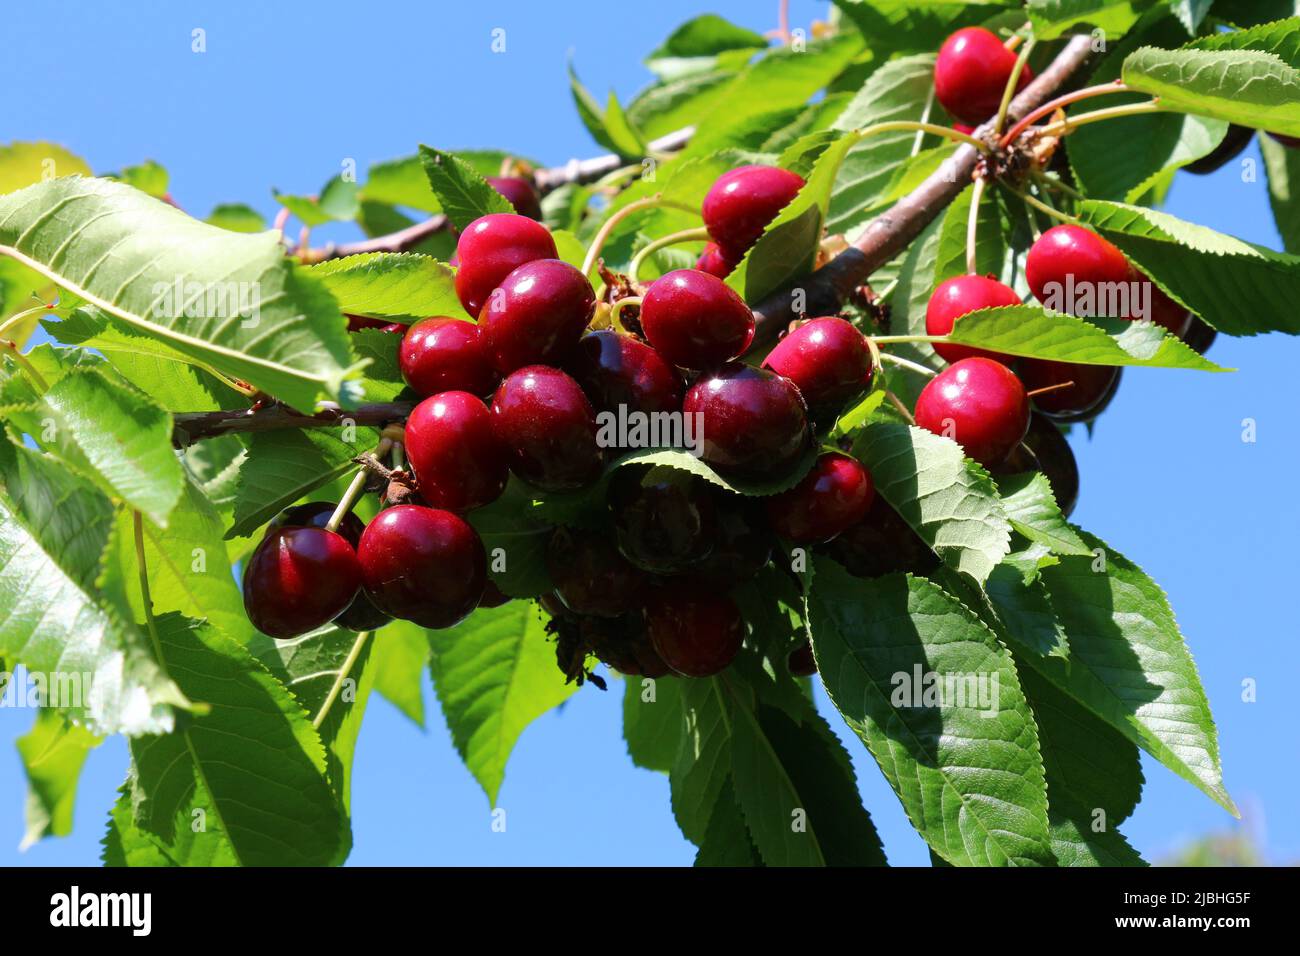 Vignola cherries, fresh ripe fruit still to be picked on the tree, a typical Italian product Stock Photo